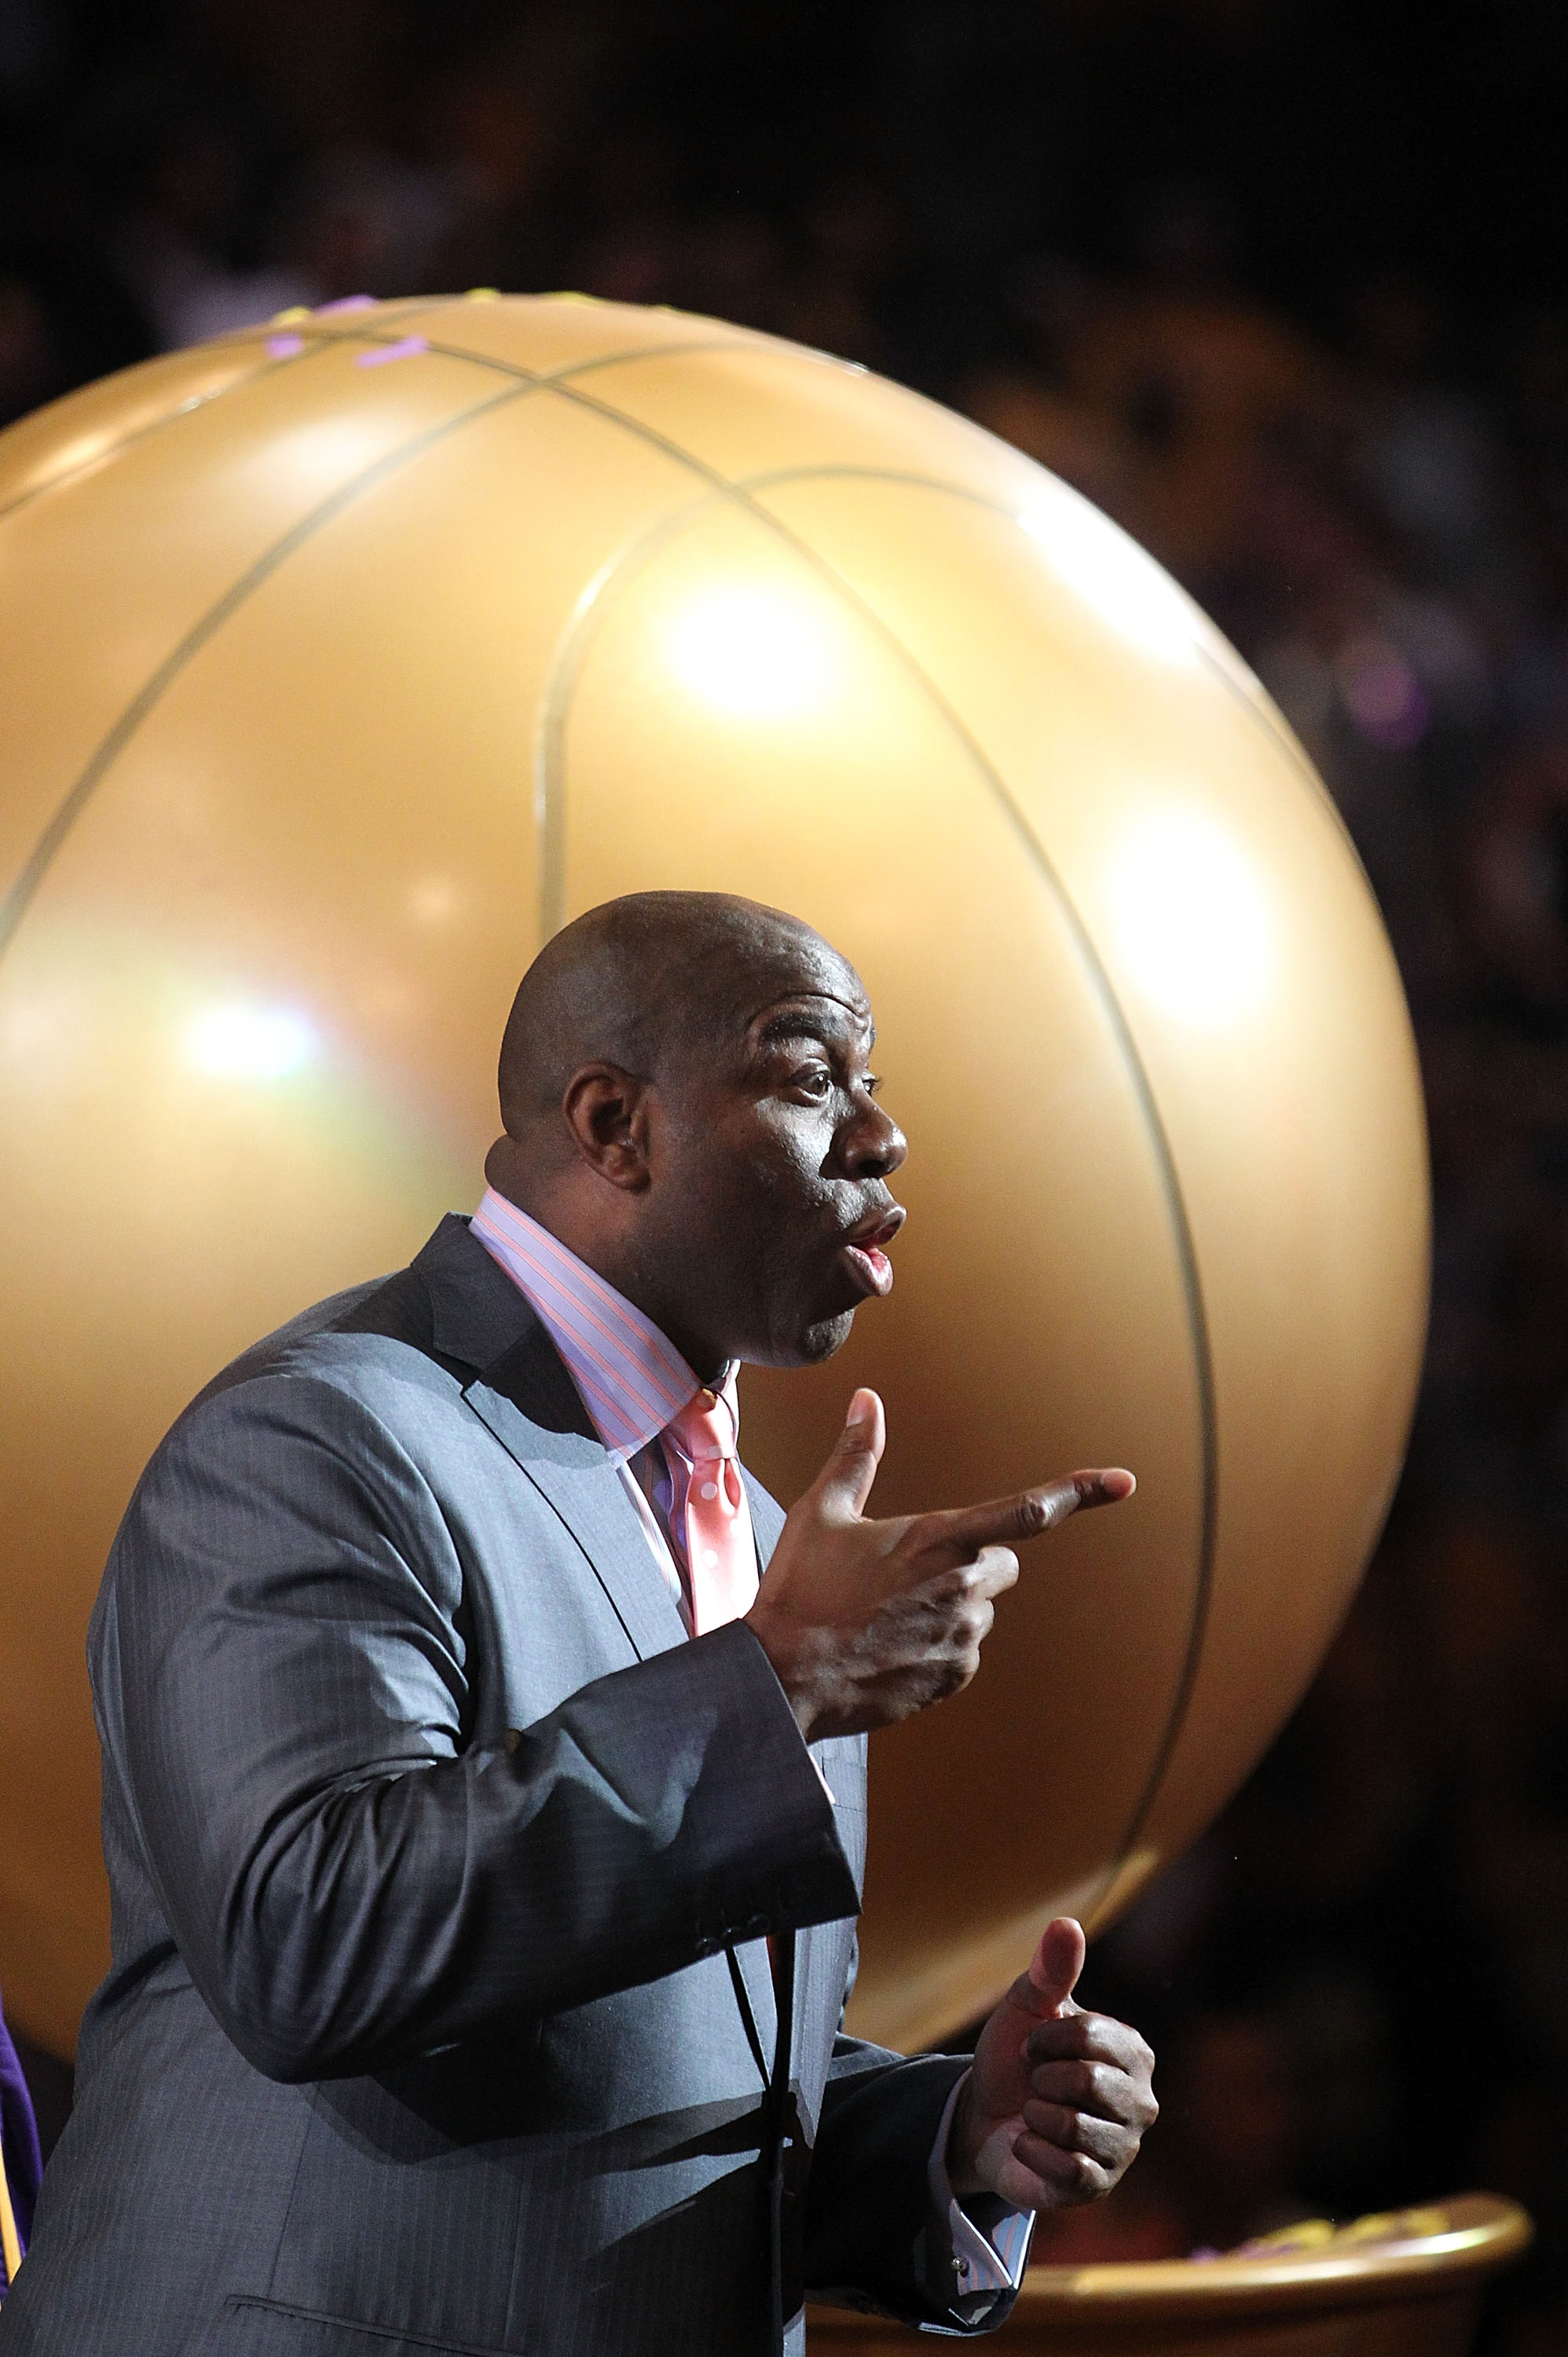 LOS ANGELES, CA - JUNE 17:  Earvin 'Magic' Johnson speaks from the stage after the Lakers defeated the Boston Celtics in Game Seven of the 2010 NBA Finals at Staples Center on June 17, 2010 in Los Angeles, California.  NOTE TO USER: User expressly acknowl